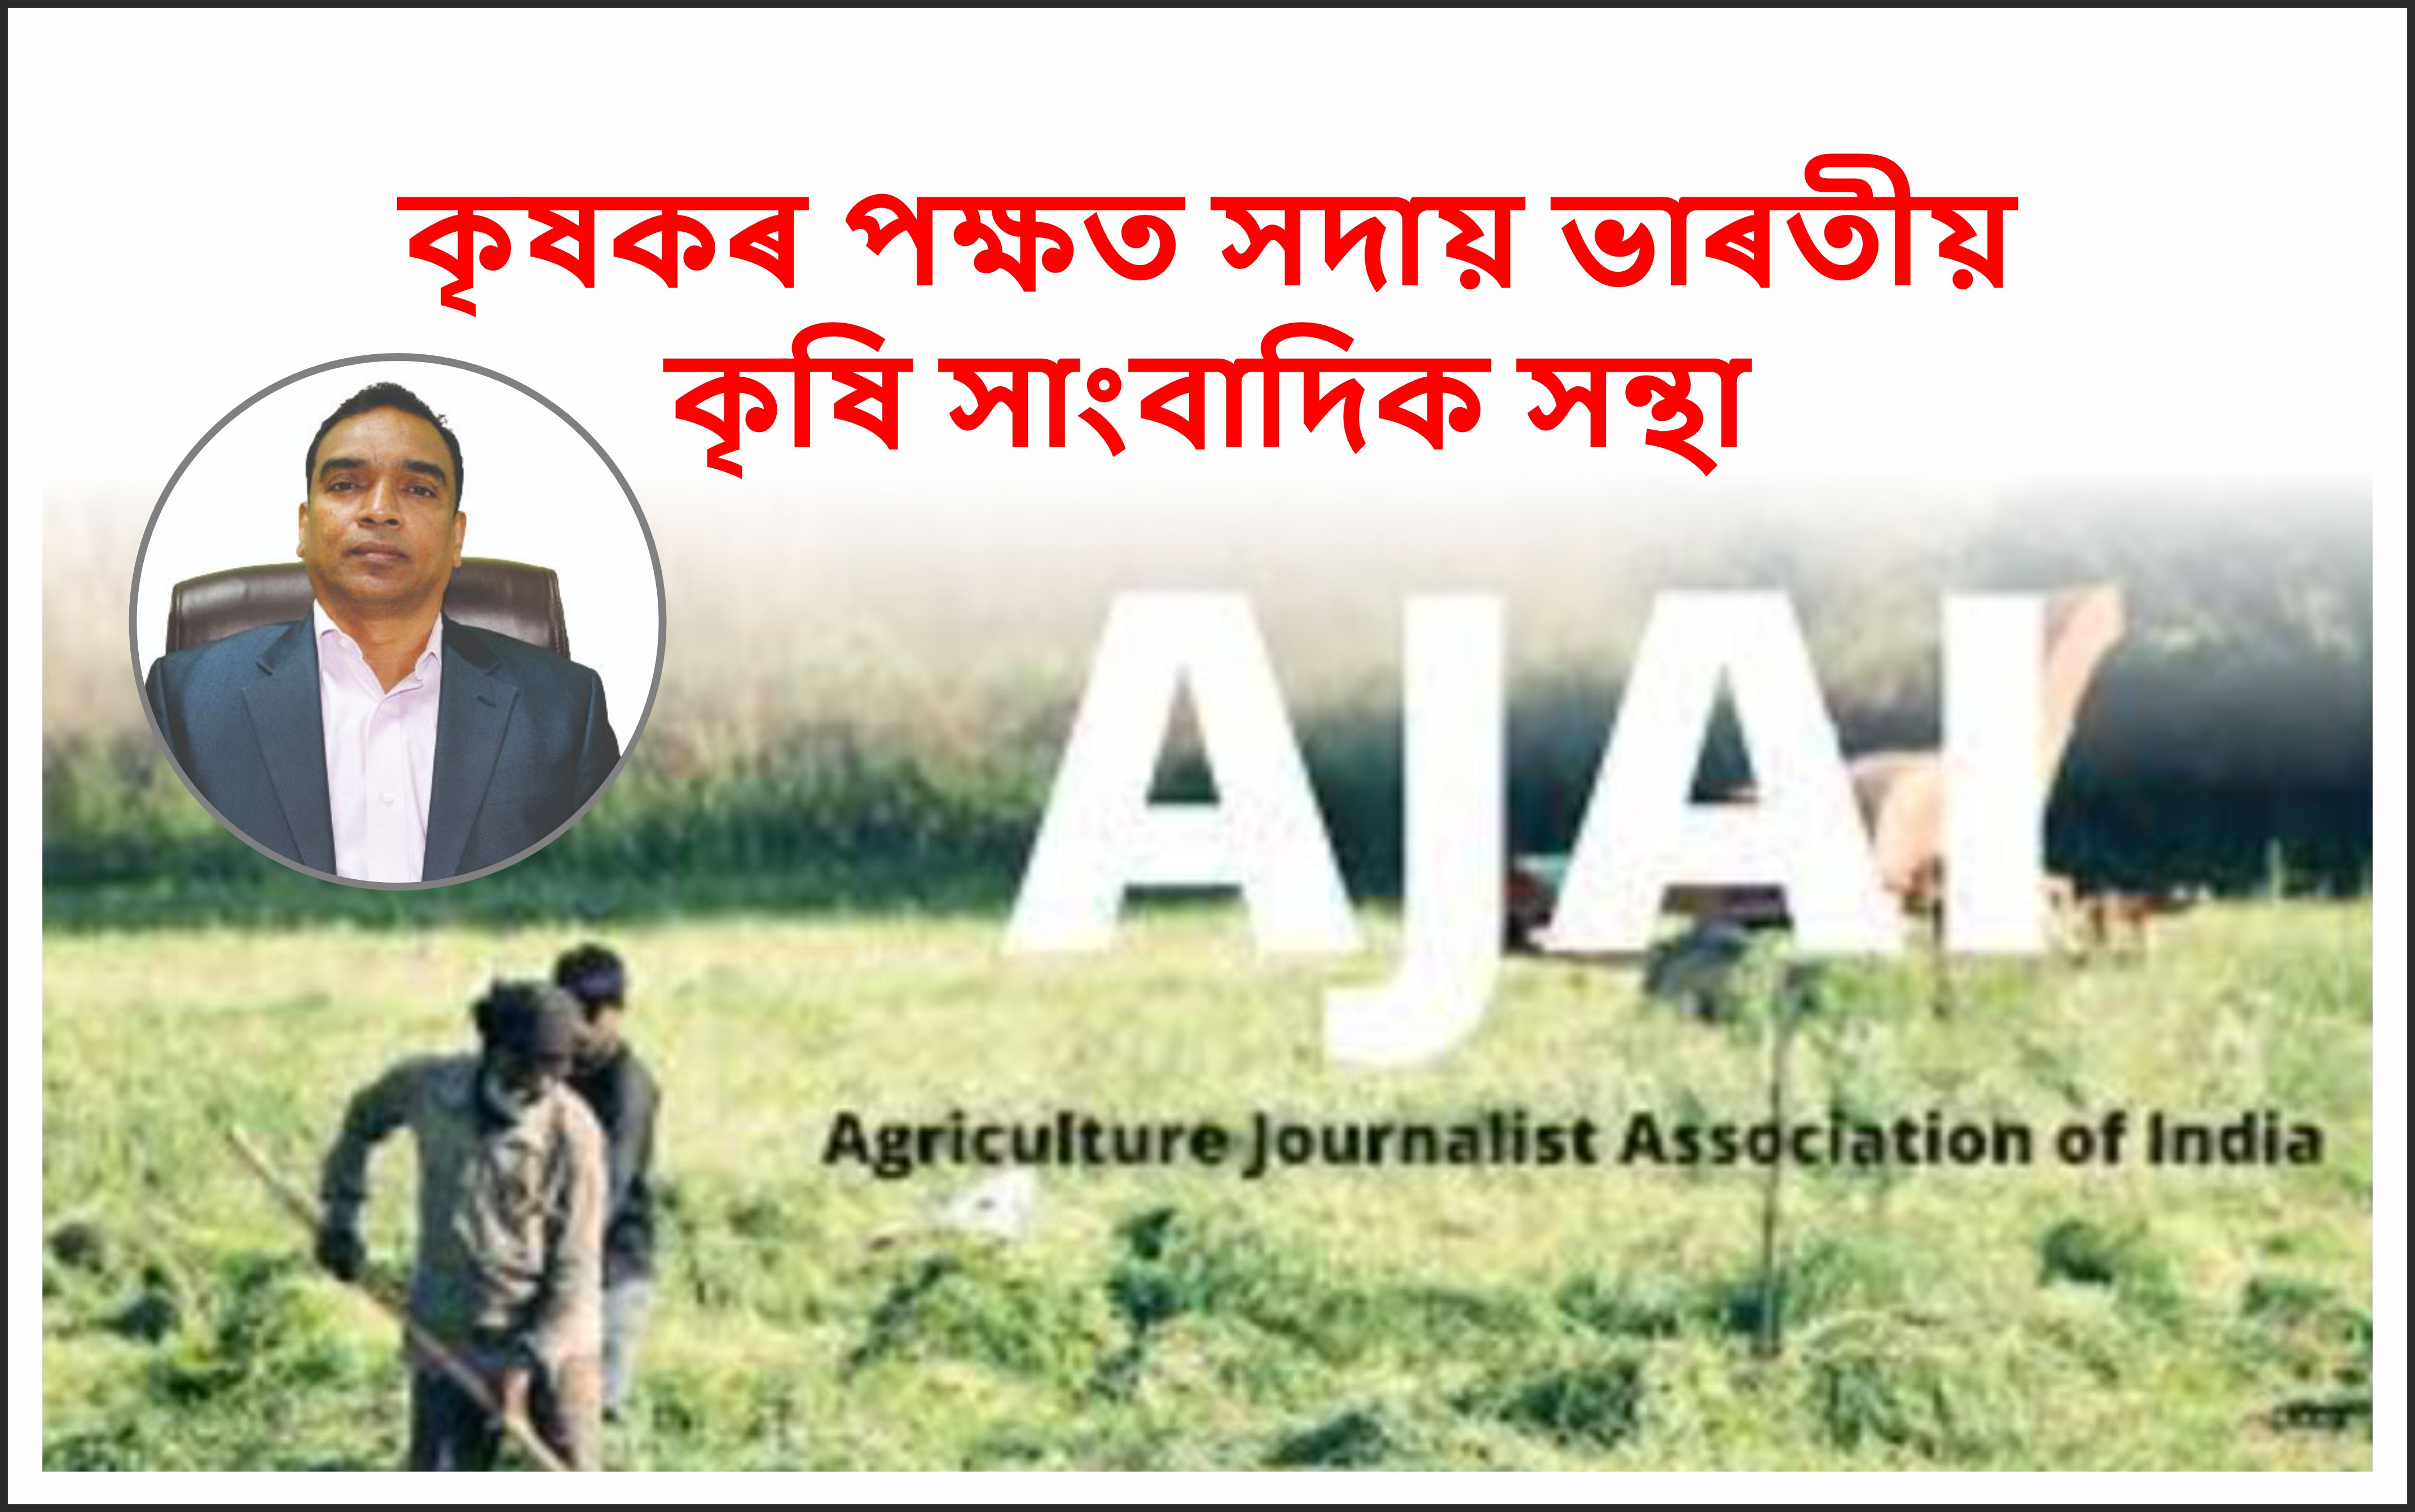 Agriculture Journalist Association of India